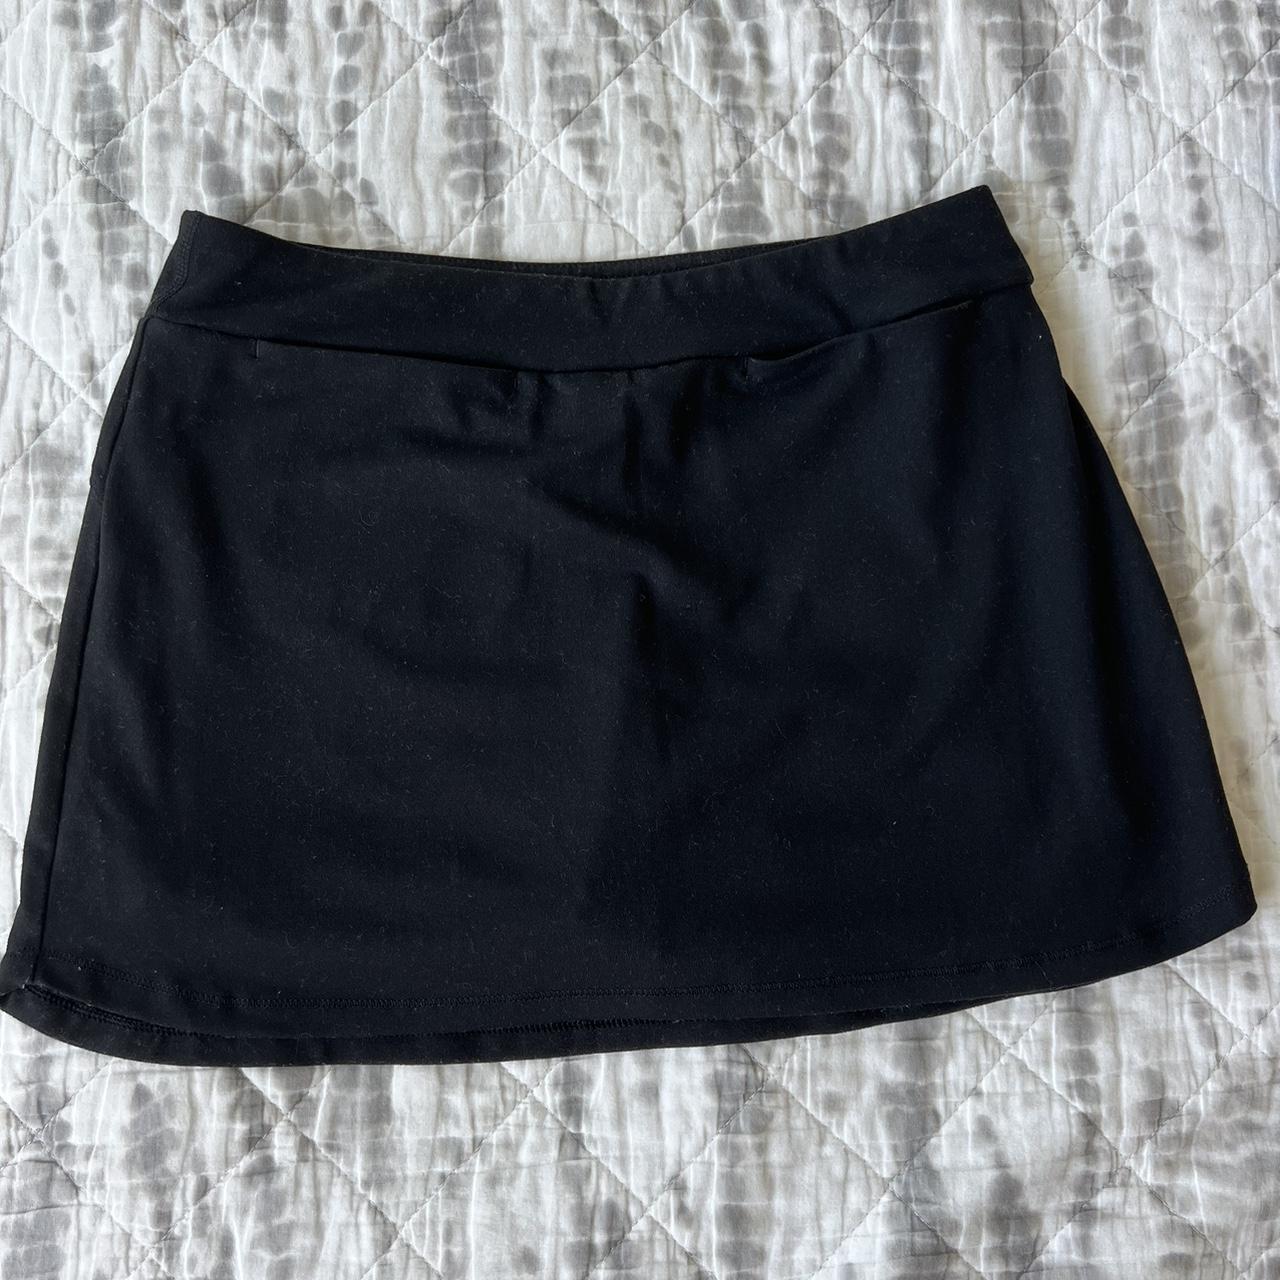 dsg tennis skirt. thick material with built in... - Depop